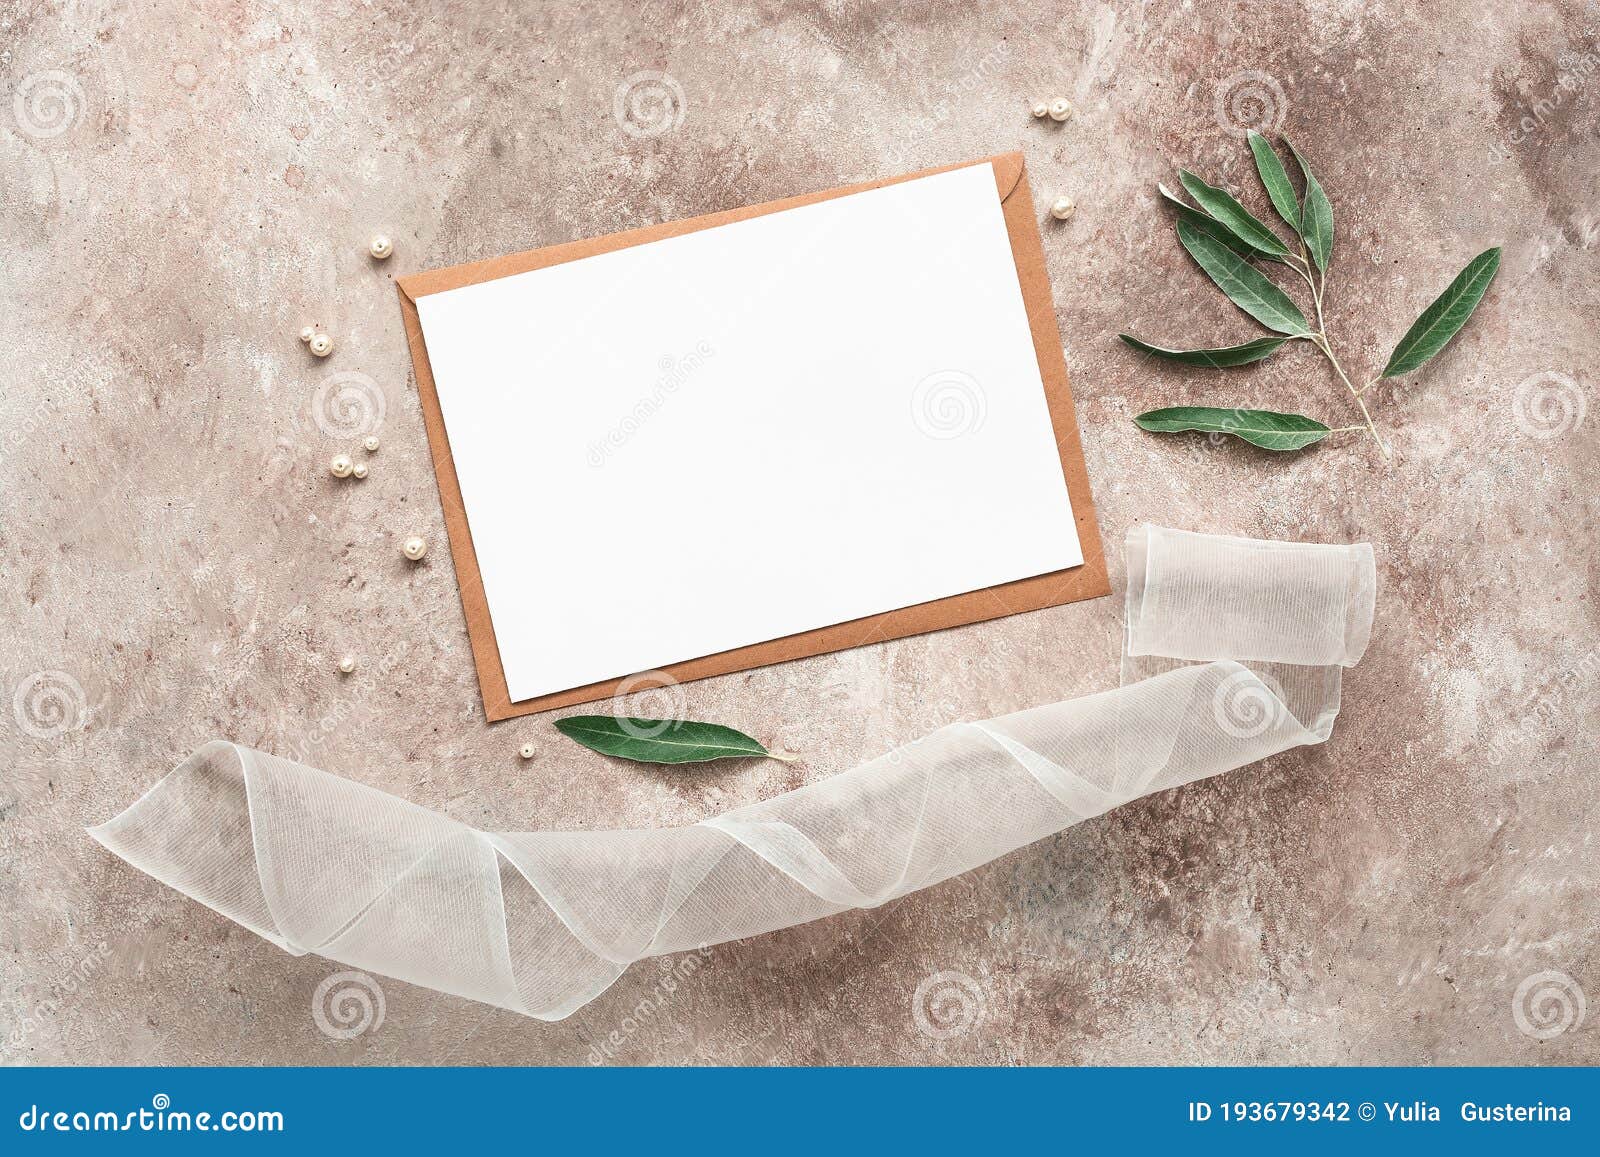 Wedding Invitation with Accessories. Blank Card Mockup, Envelope, Silk  Ribbon, Olive Branch and Pearls. Female Workspace Template Stock Photo -  Image of copy, life: 193679342